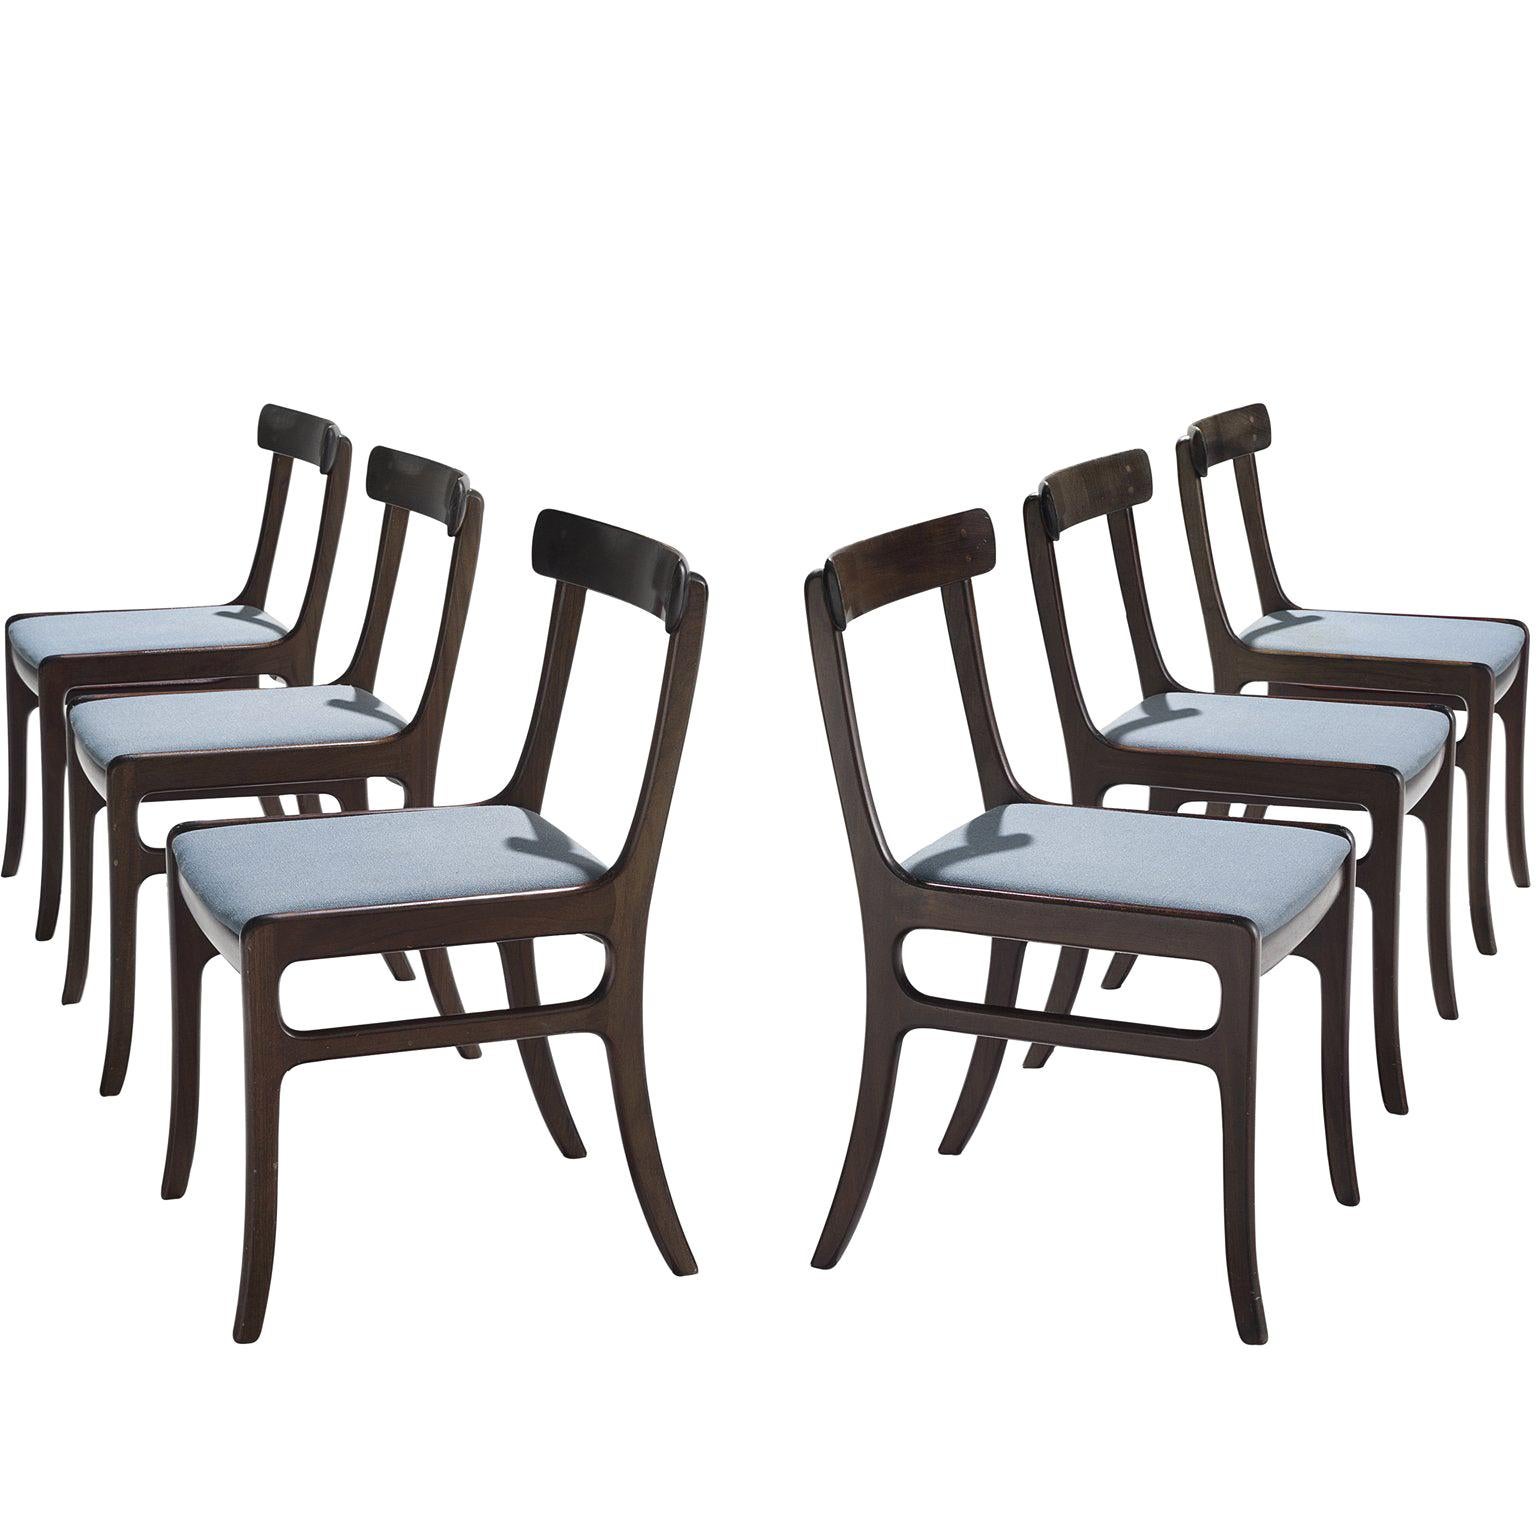 Pair of Ole Wanscher Mahogany 'Rungstedlund' Dining Chairs